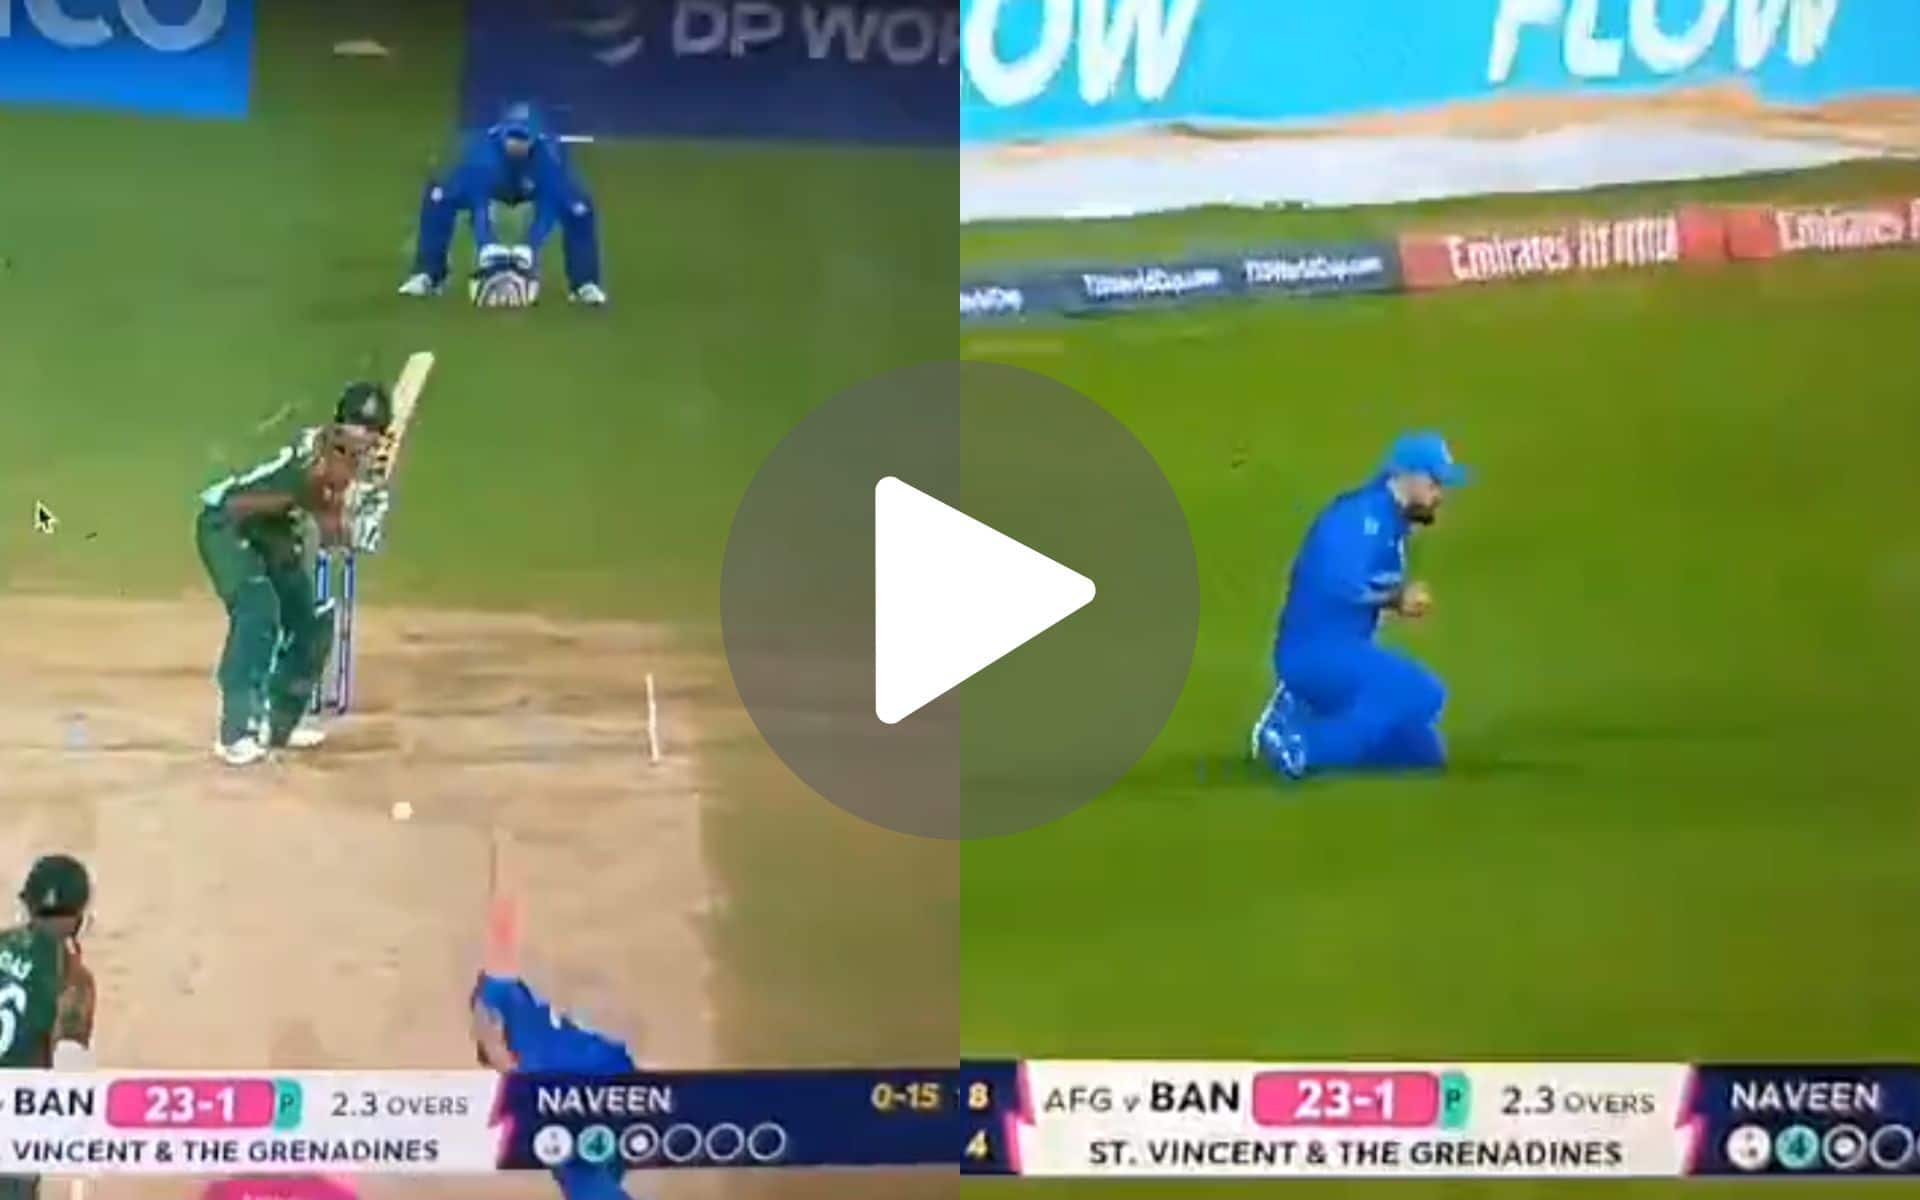 [Watch] Naveen-ul-Haq Gives 'Evil Smile' As He Outfoxes Najmul Shanto With A Slow Ball